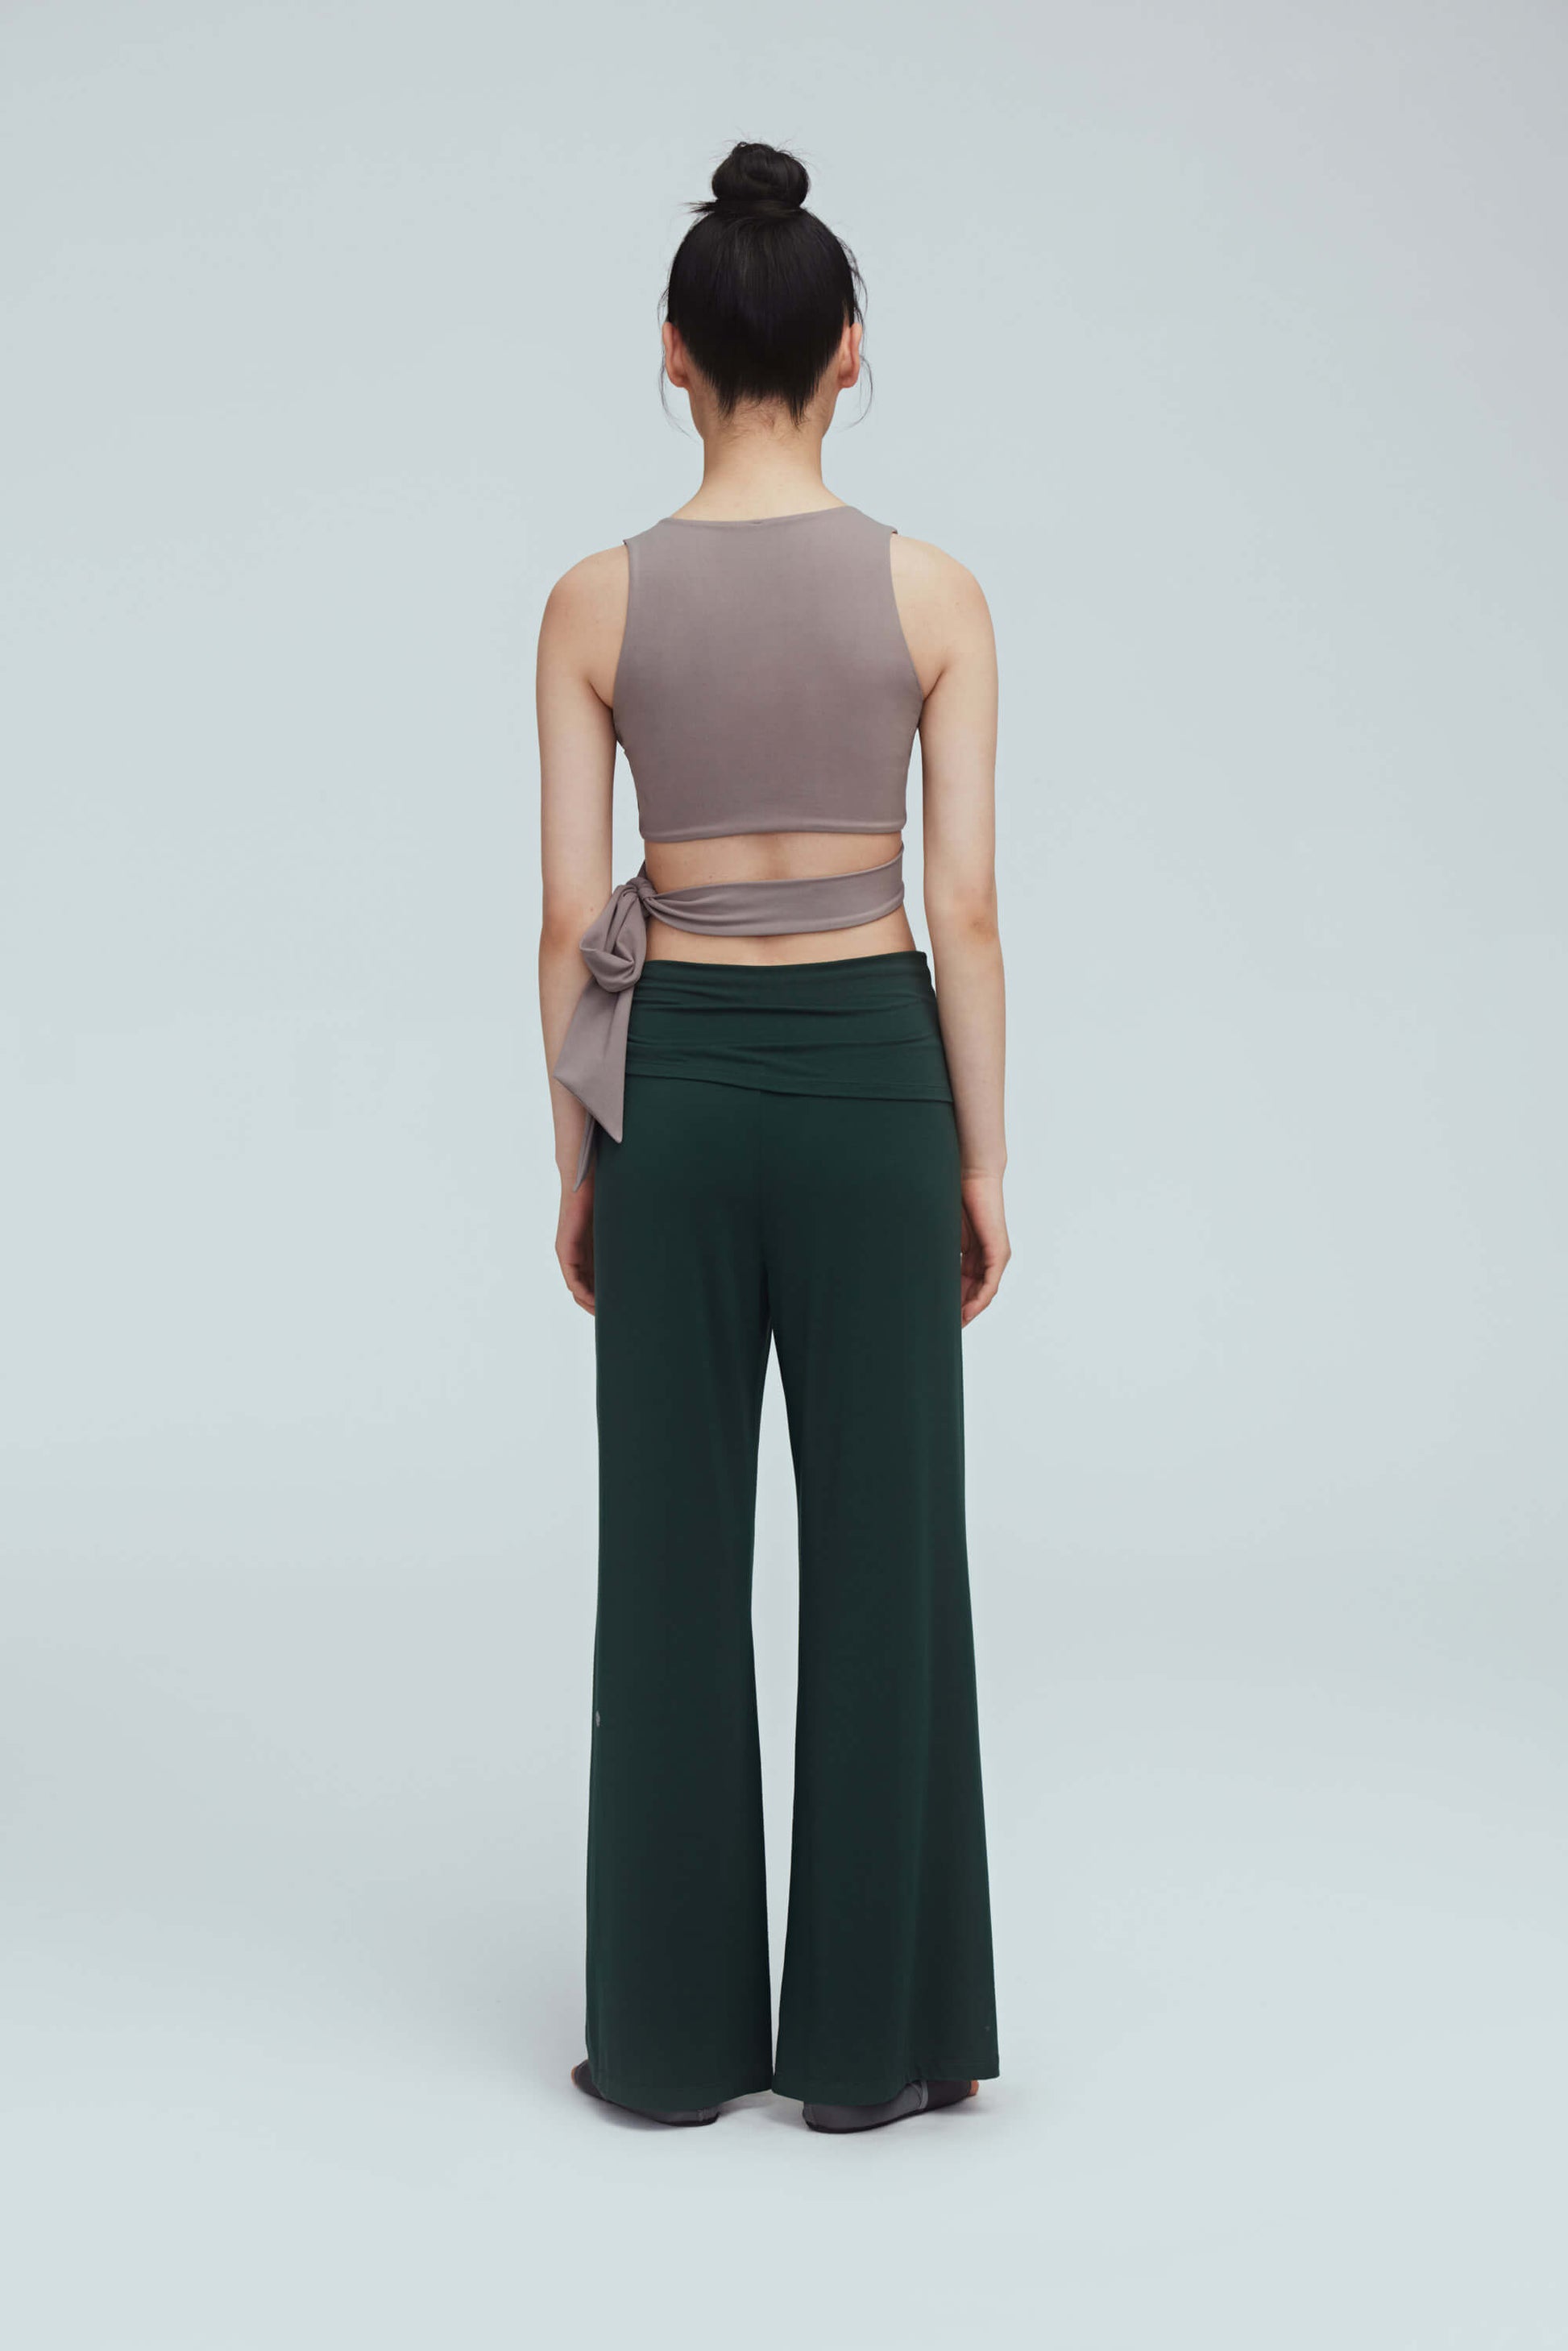 back of a woman wearing a light brown wrap bra top and green leggings